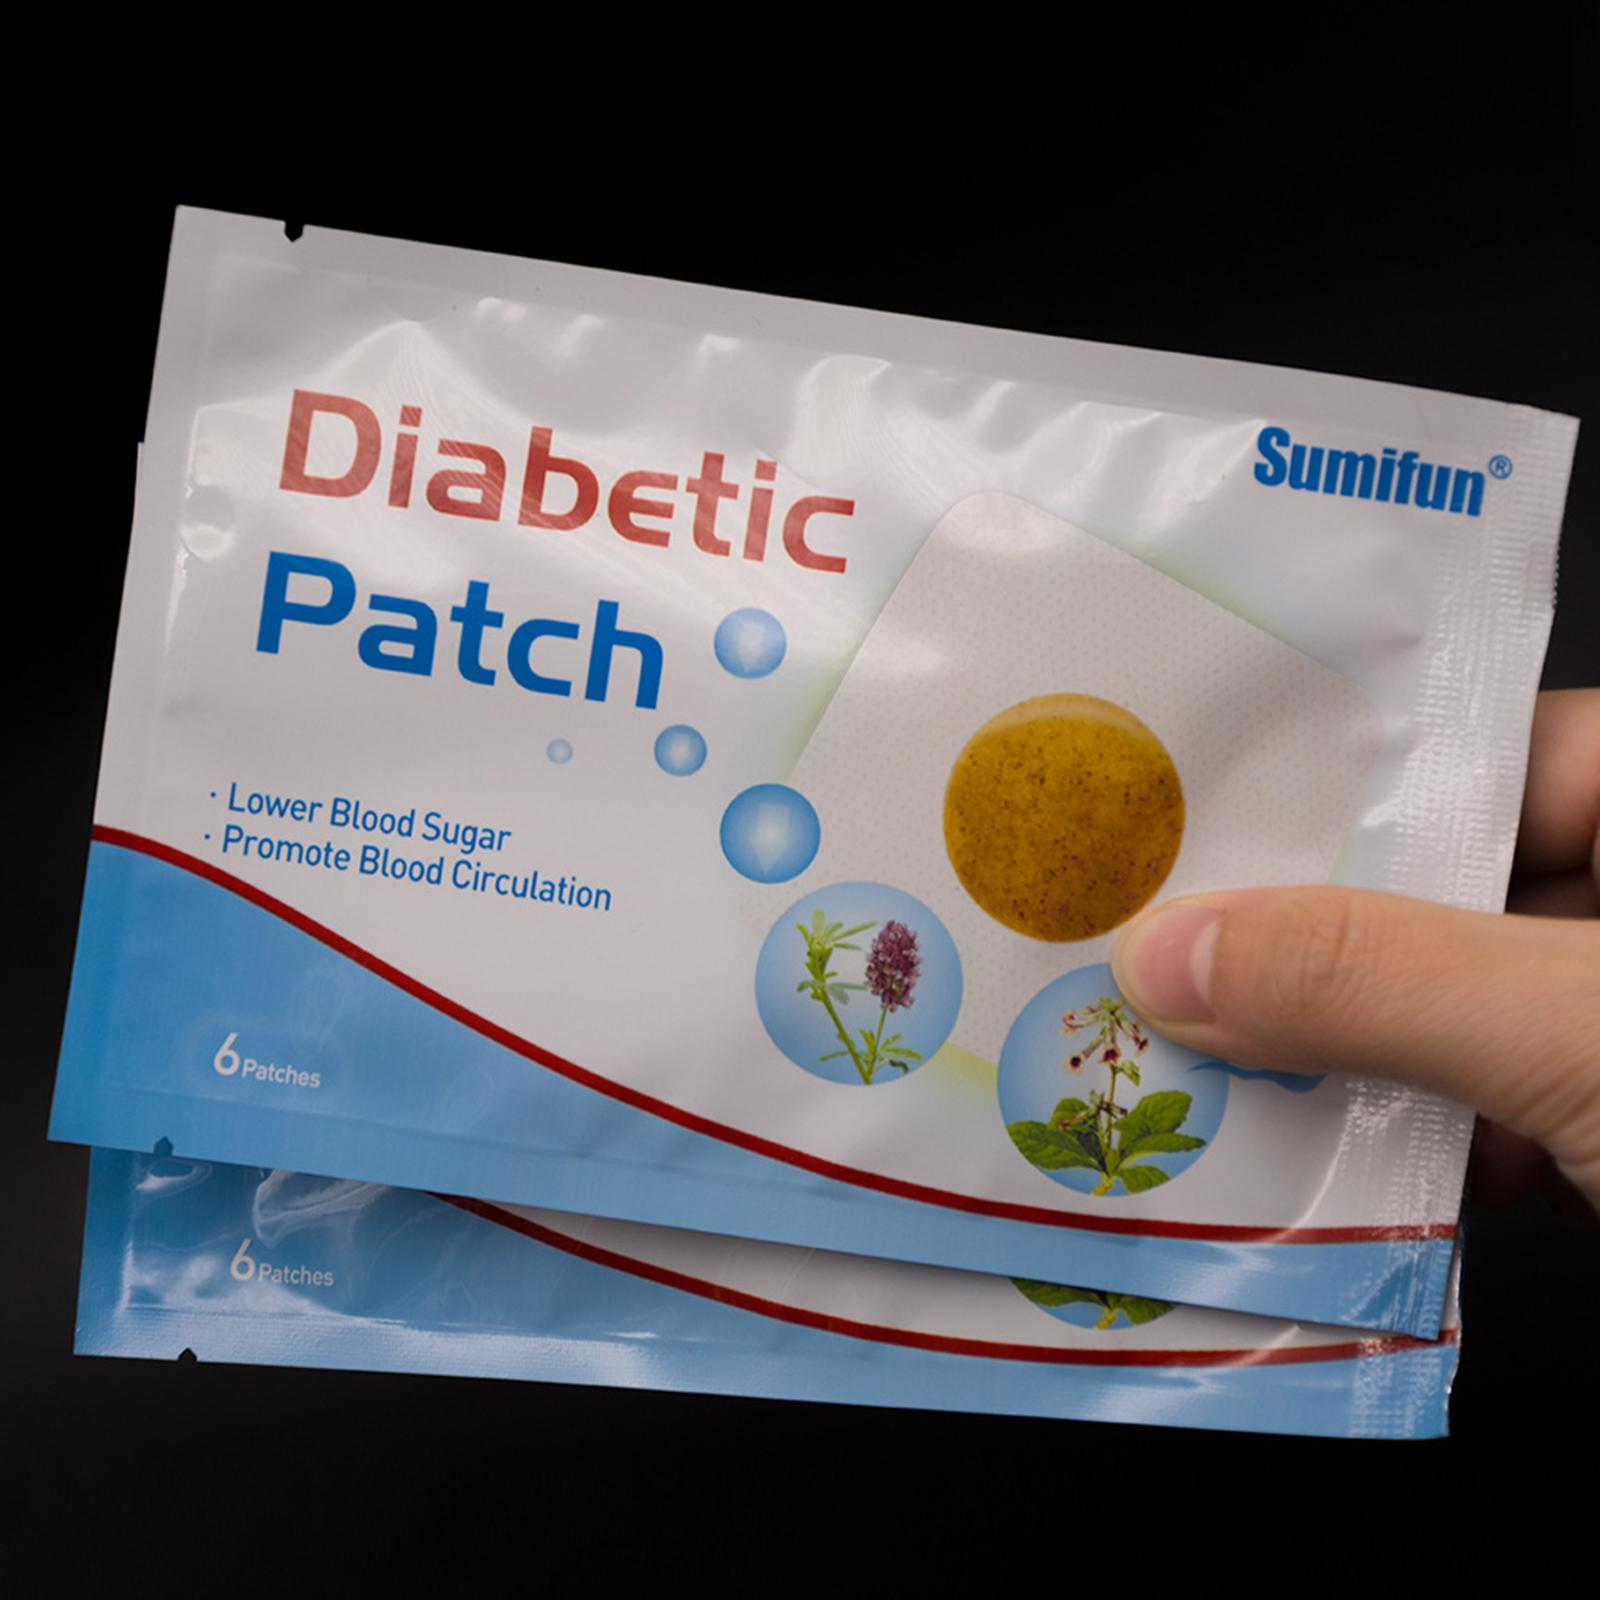 Sumifun 6 Patches Diabetic Patch Ointment Stickers Lower Blood Sugar Promote Blood Circulation